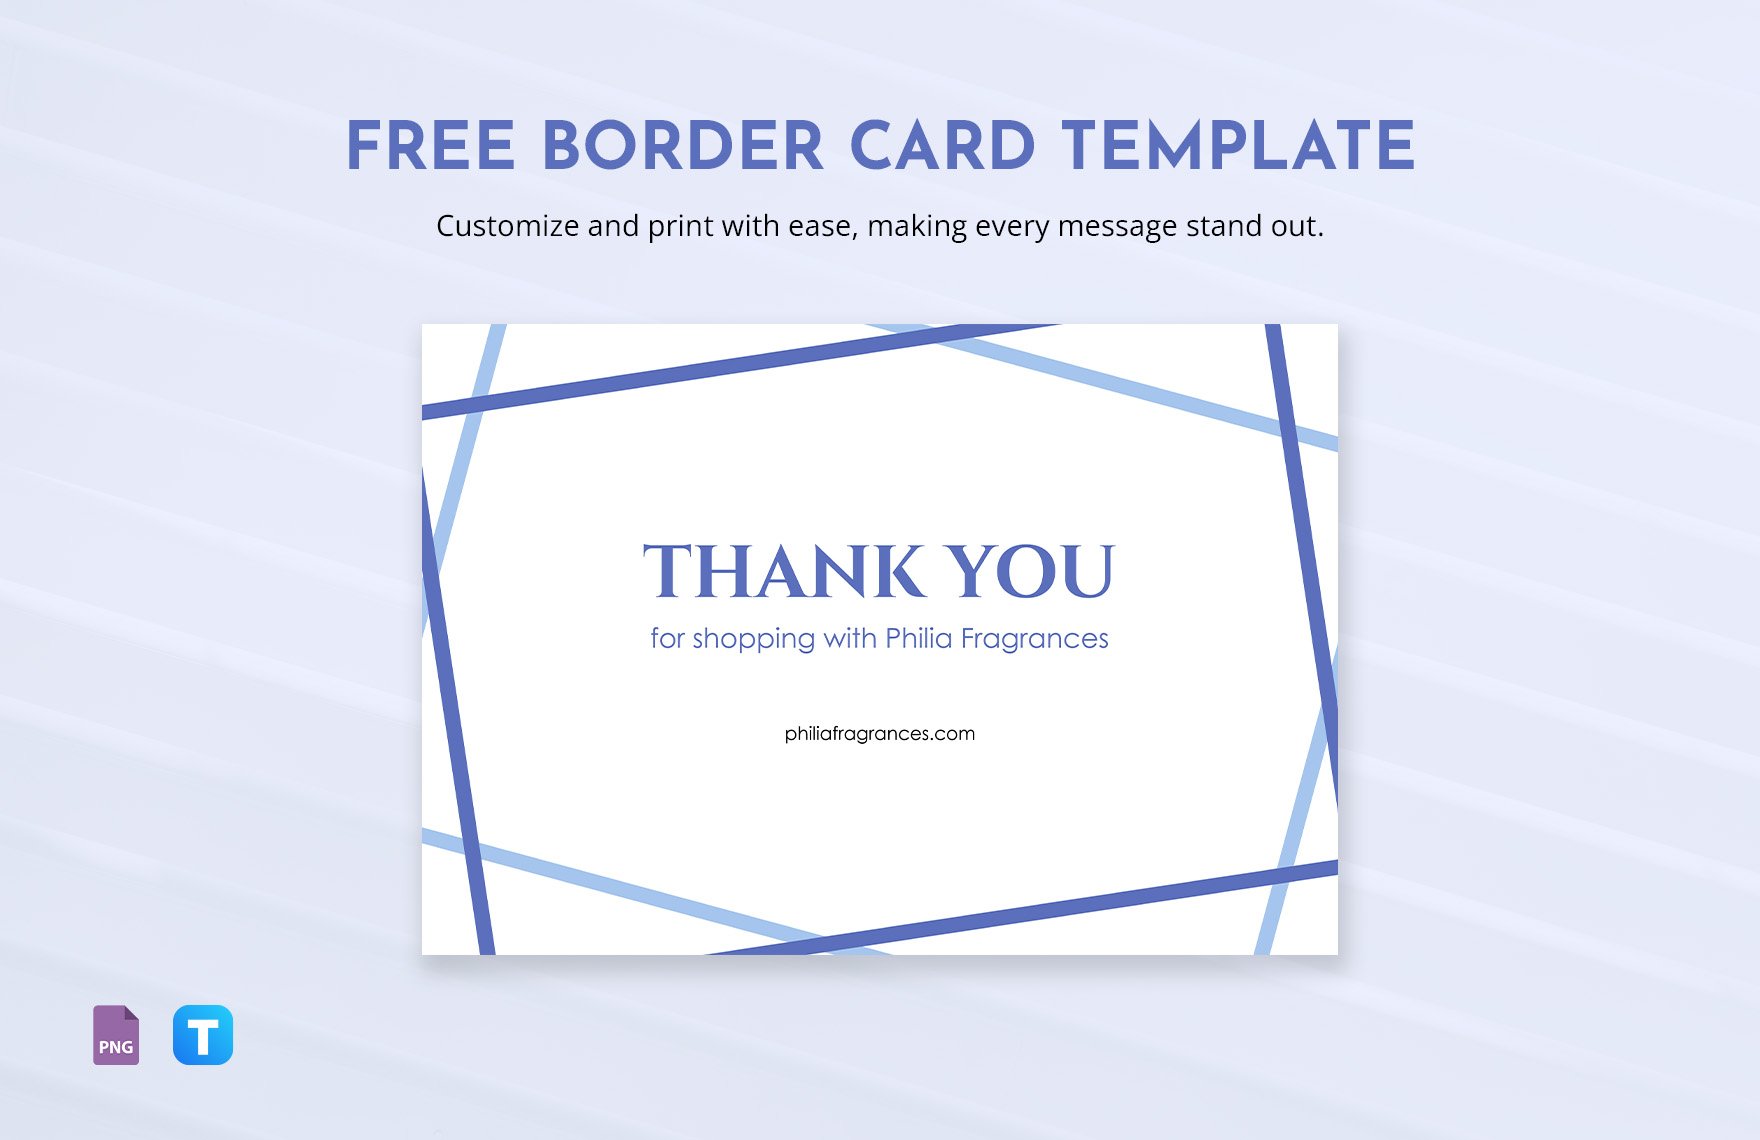 Border Card Template in PNG